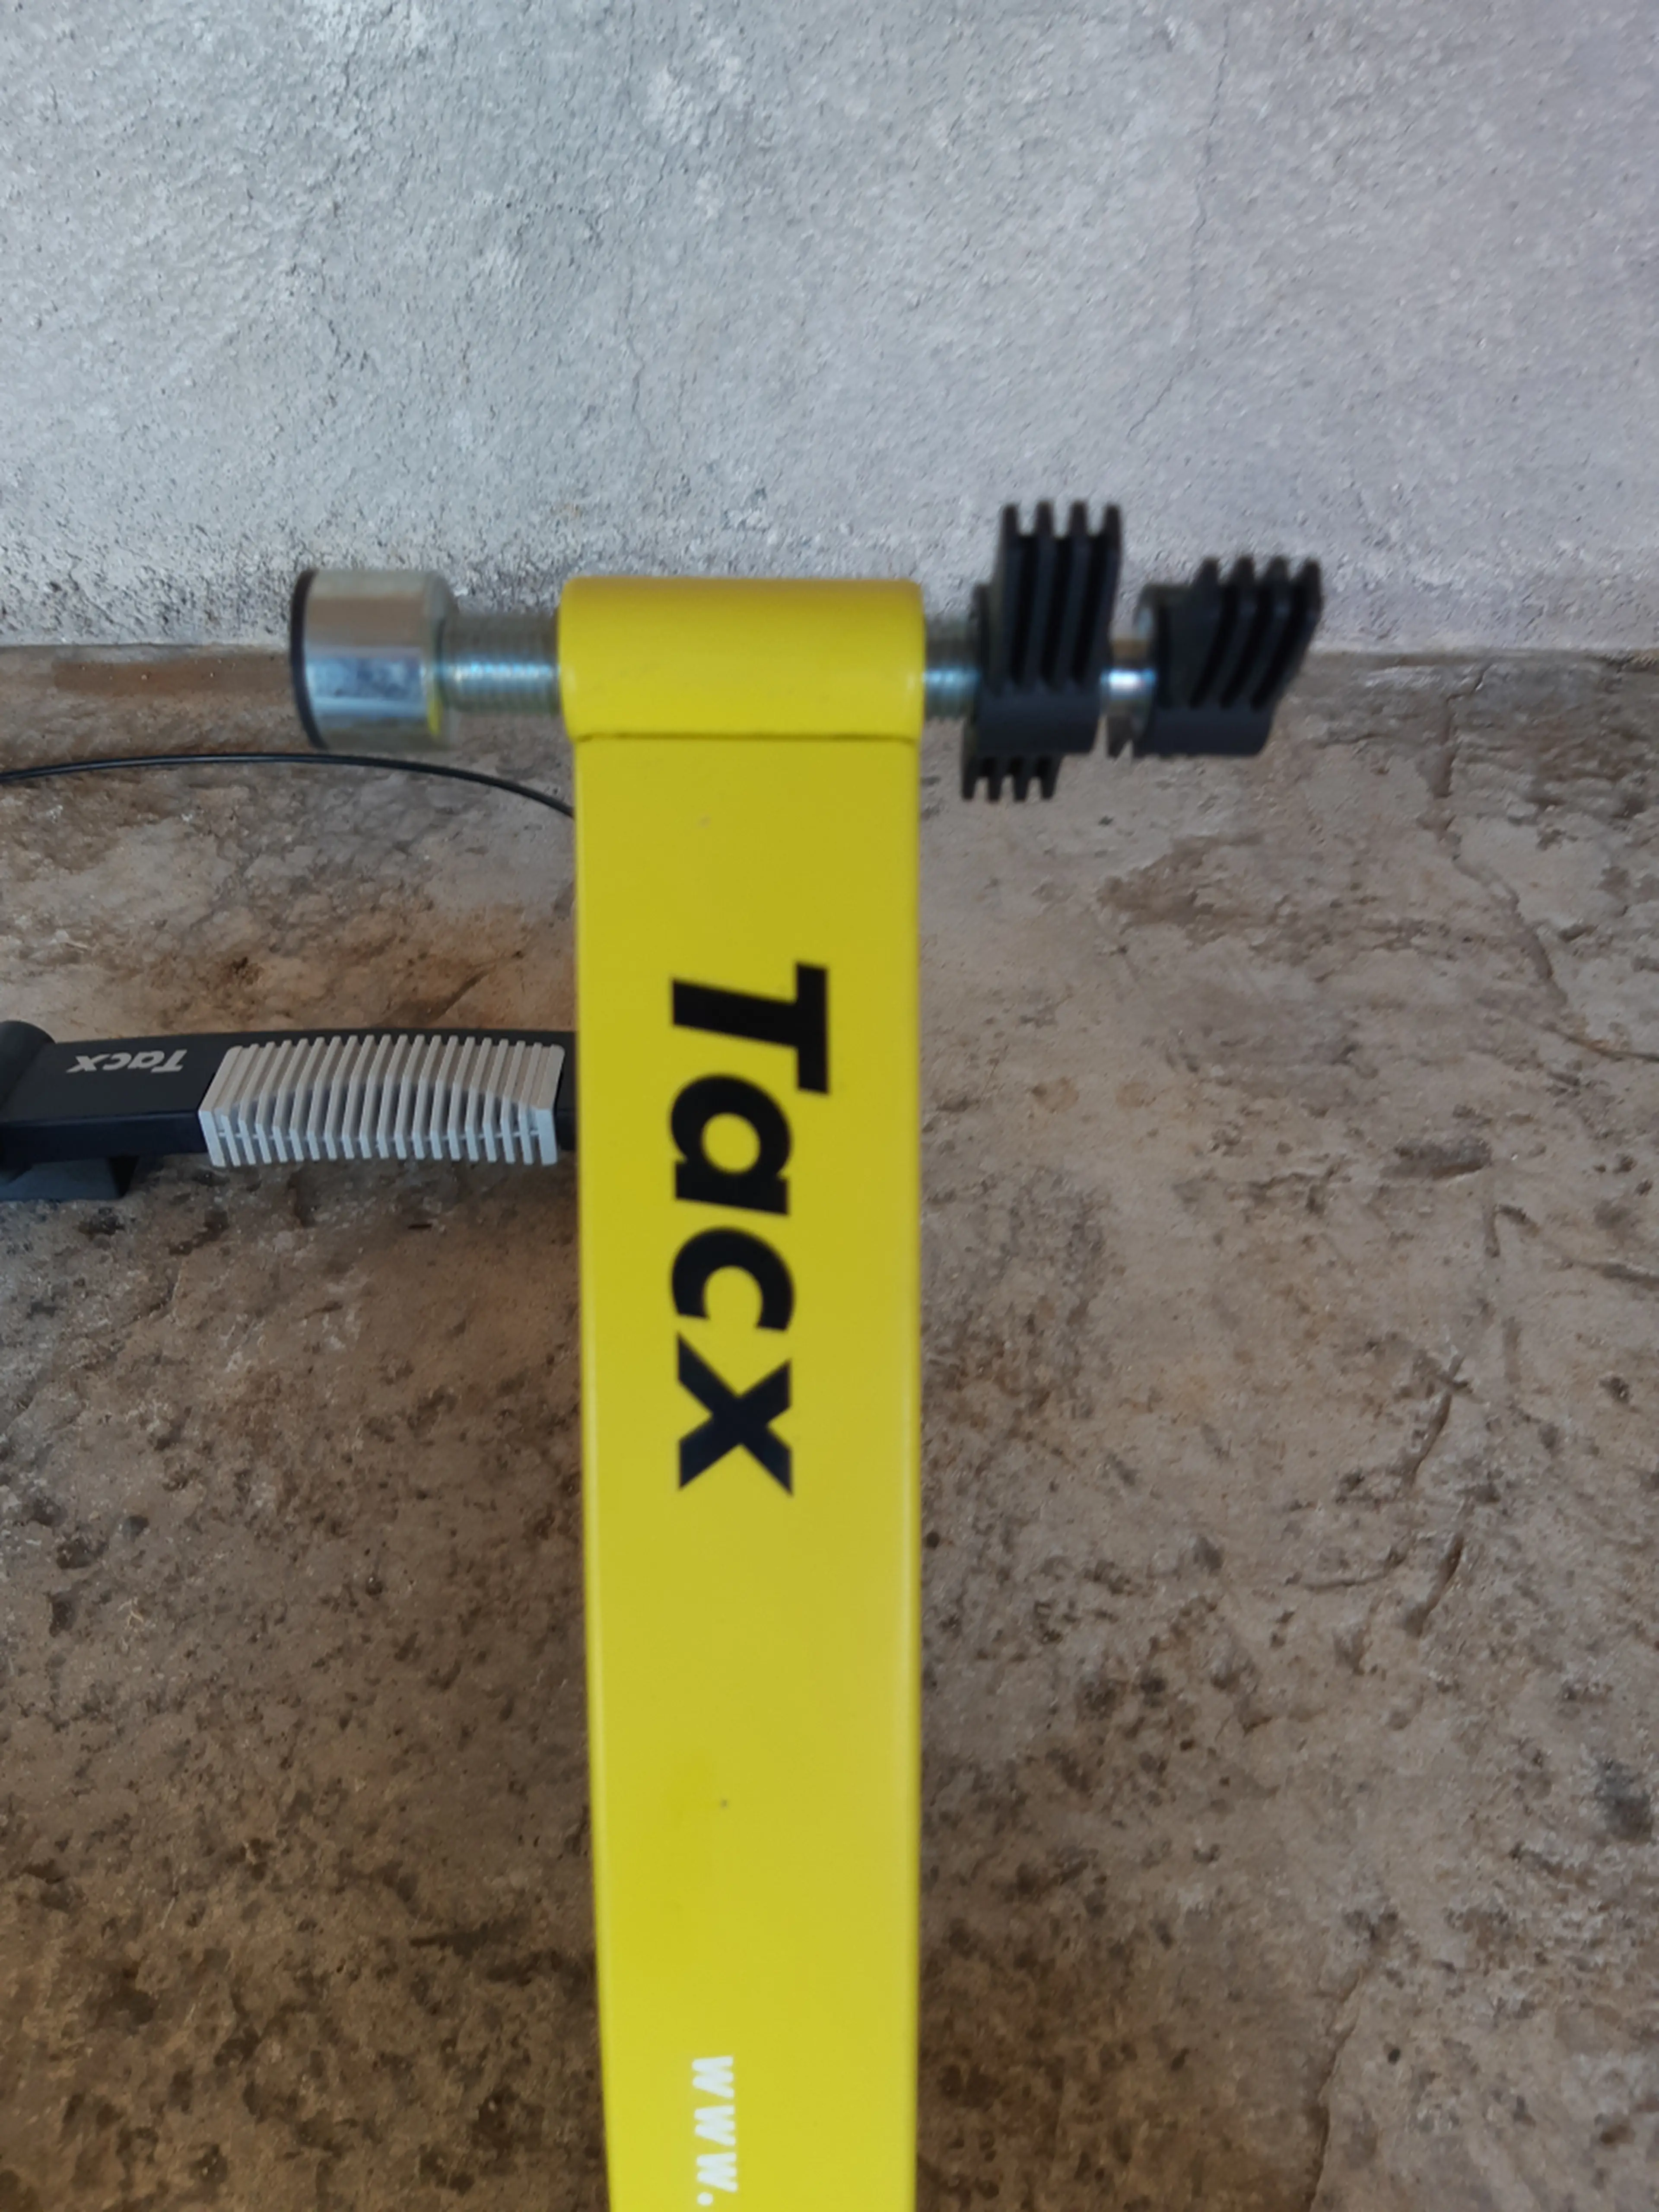 3. Trainer Tacx